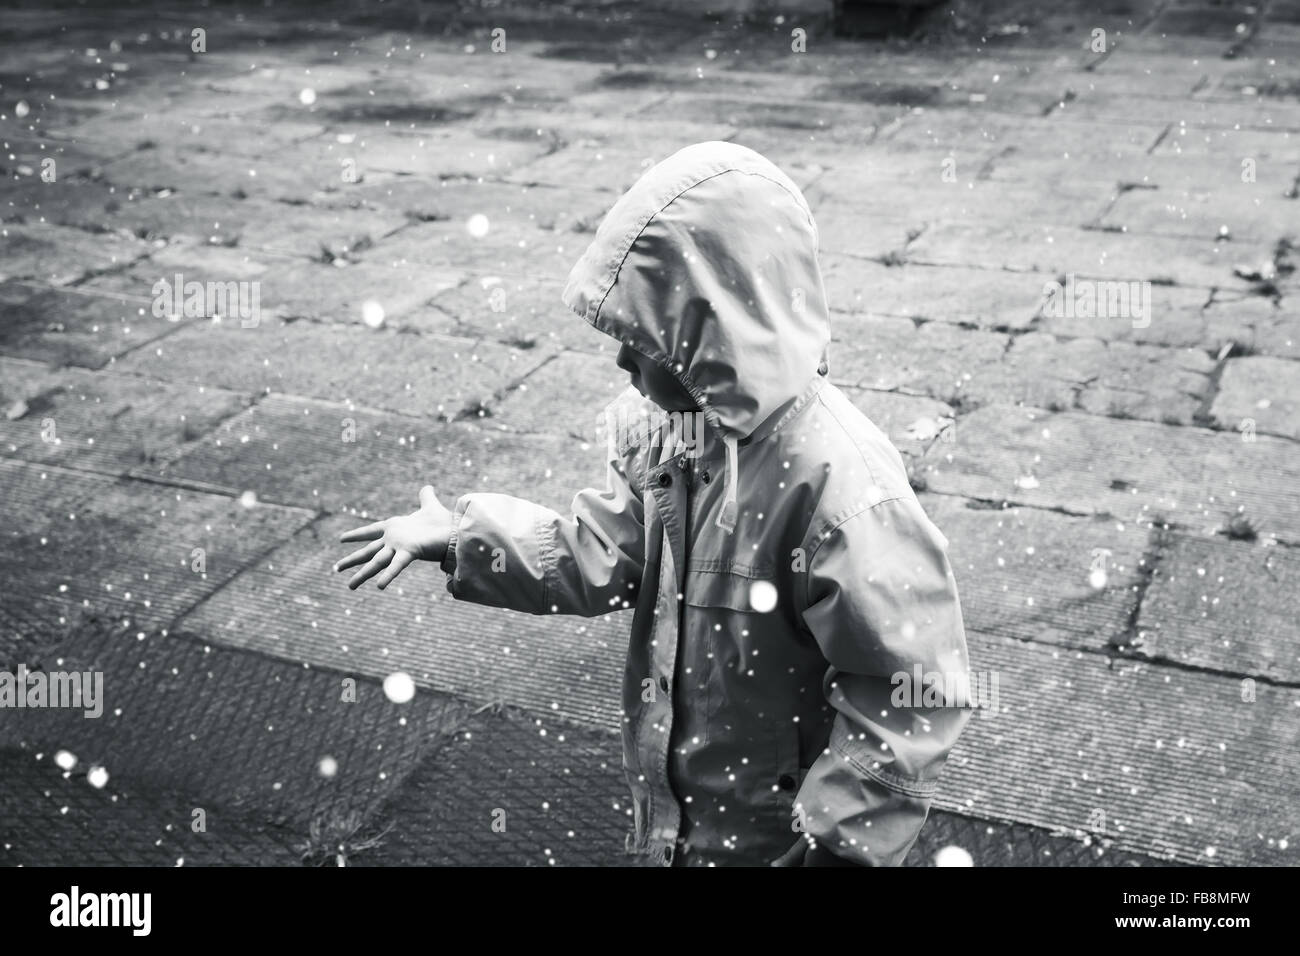 Little child in raincoat playing with raindrops. Monochrome stylized photo Stock Photo